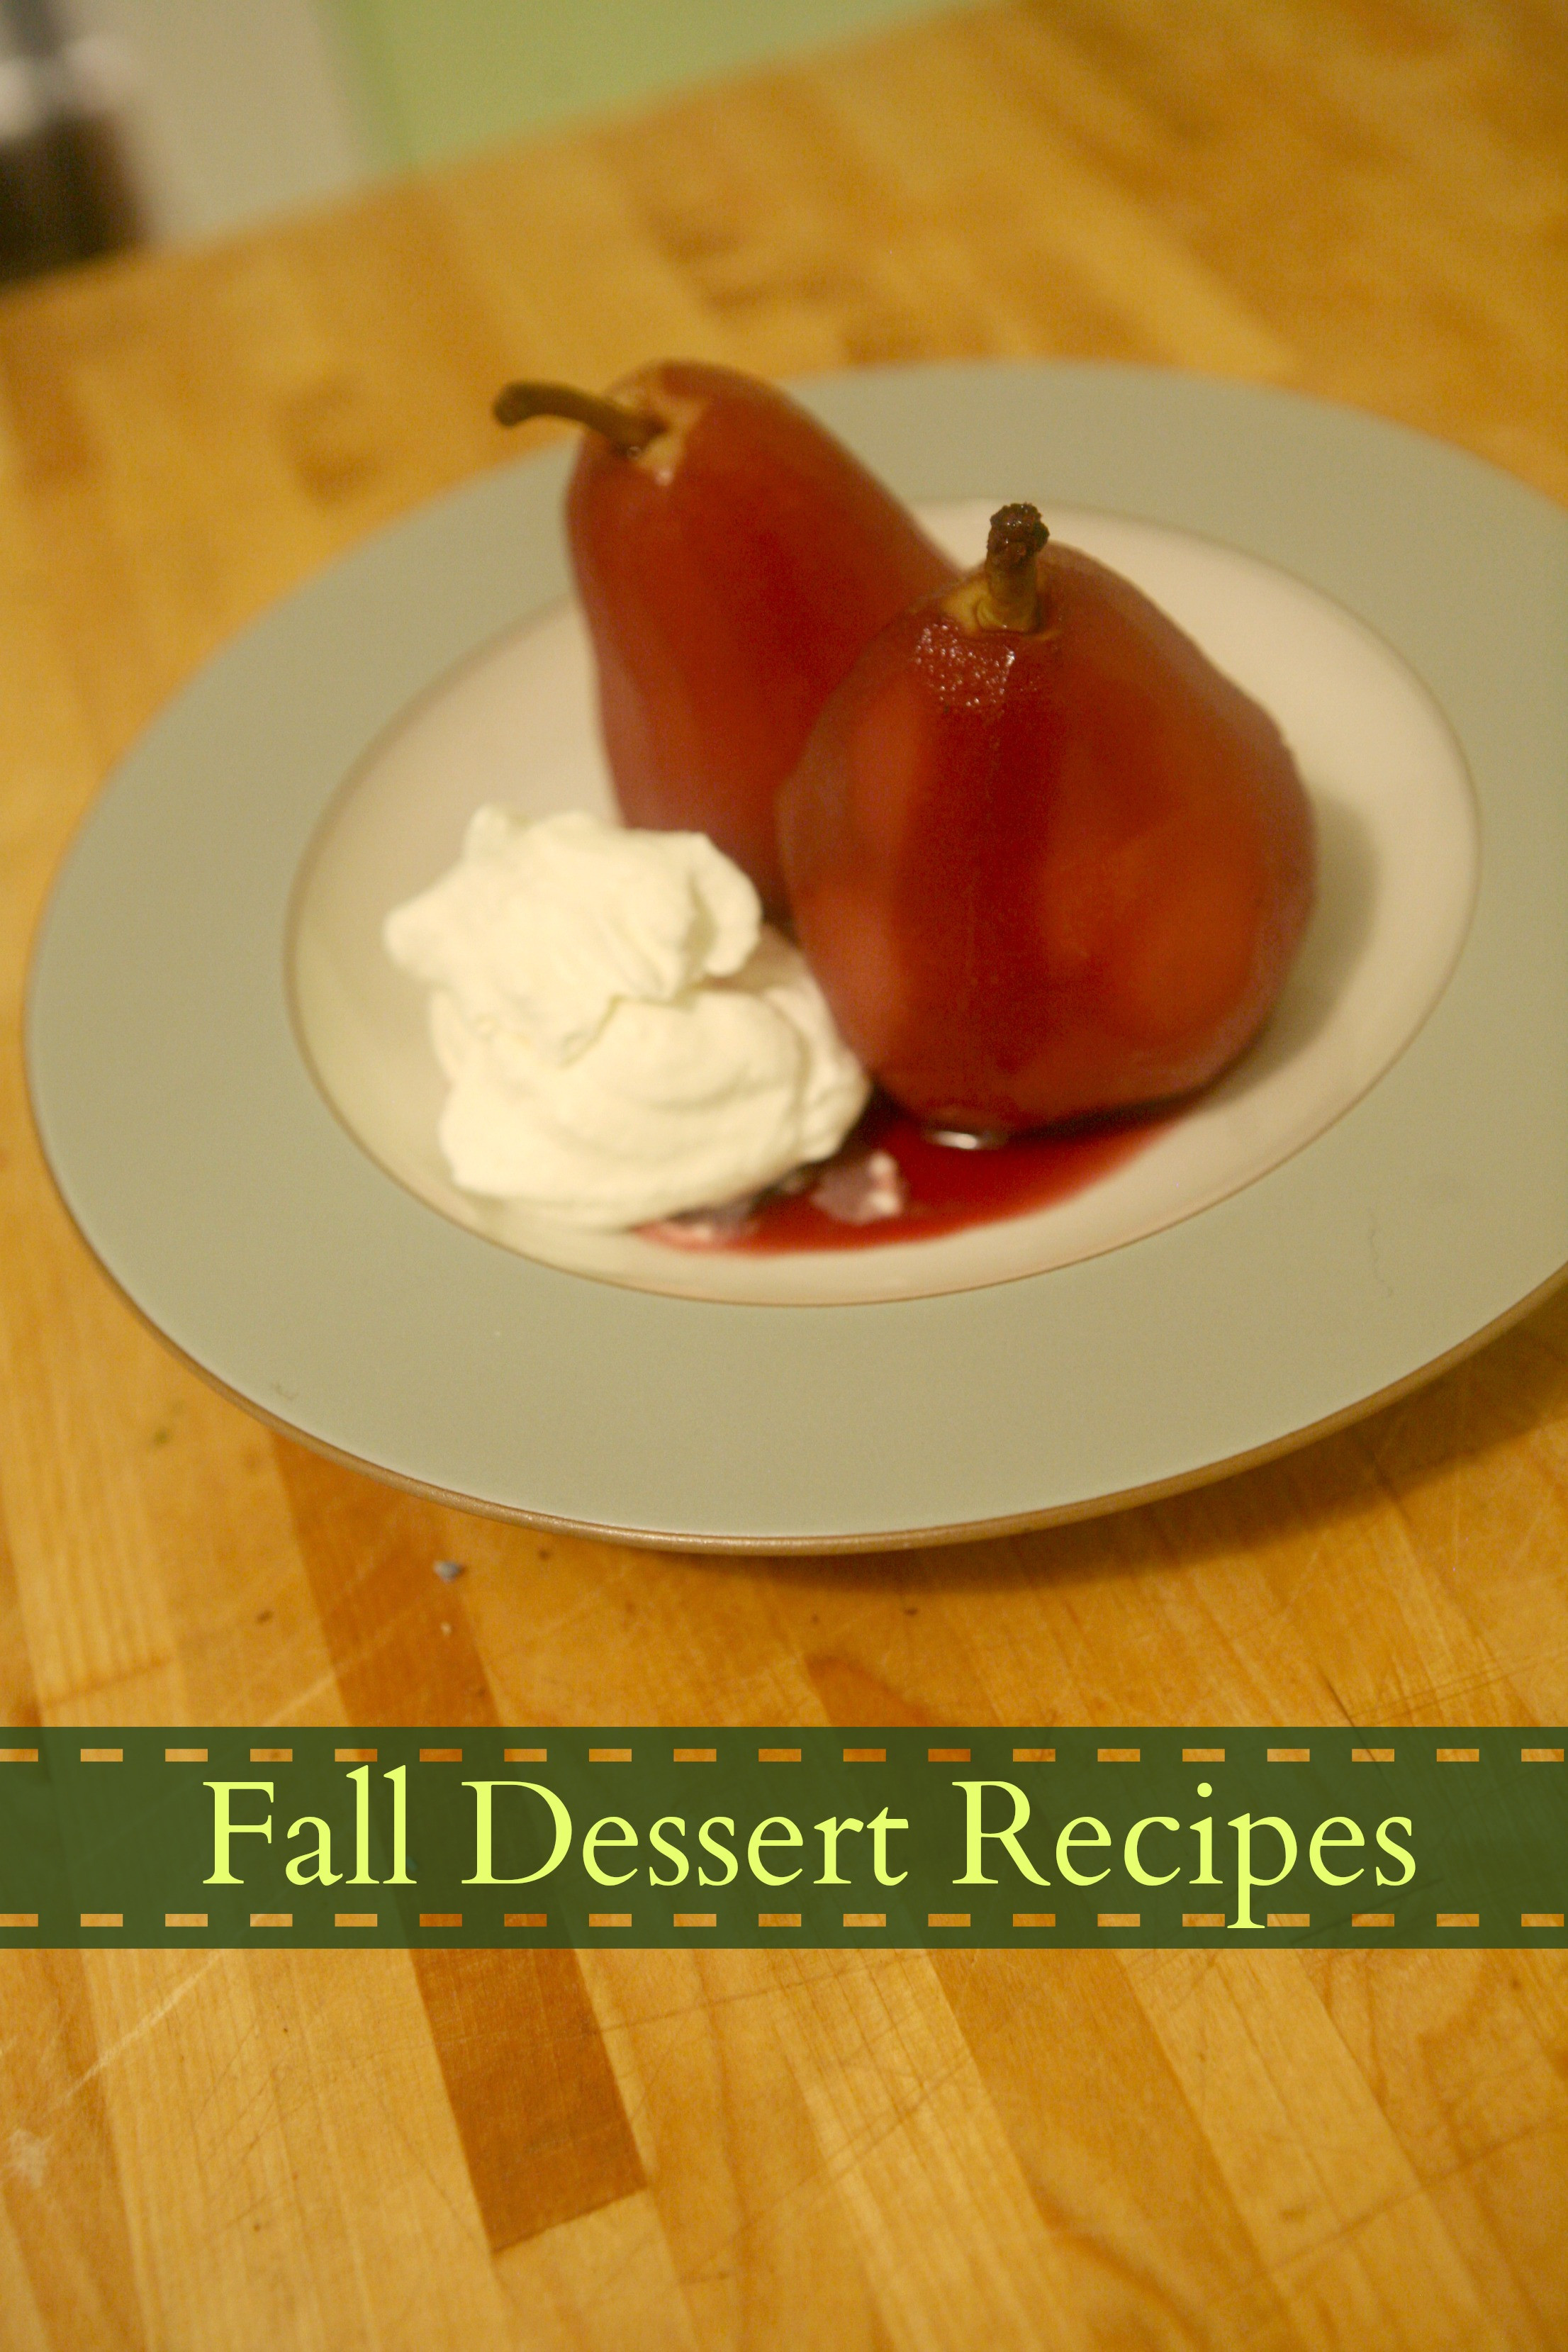 Fall Desserts Recipes
 Fall Dessert Recipes Pears poached in red wine Gluten